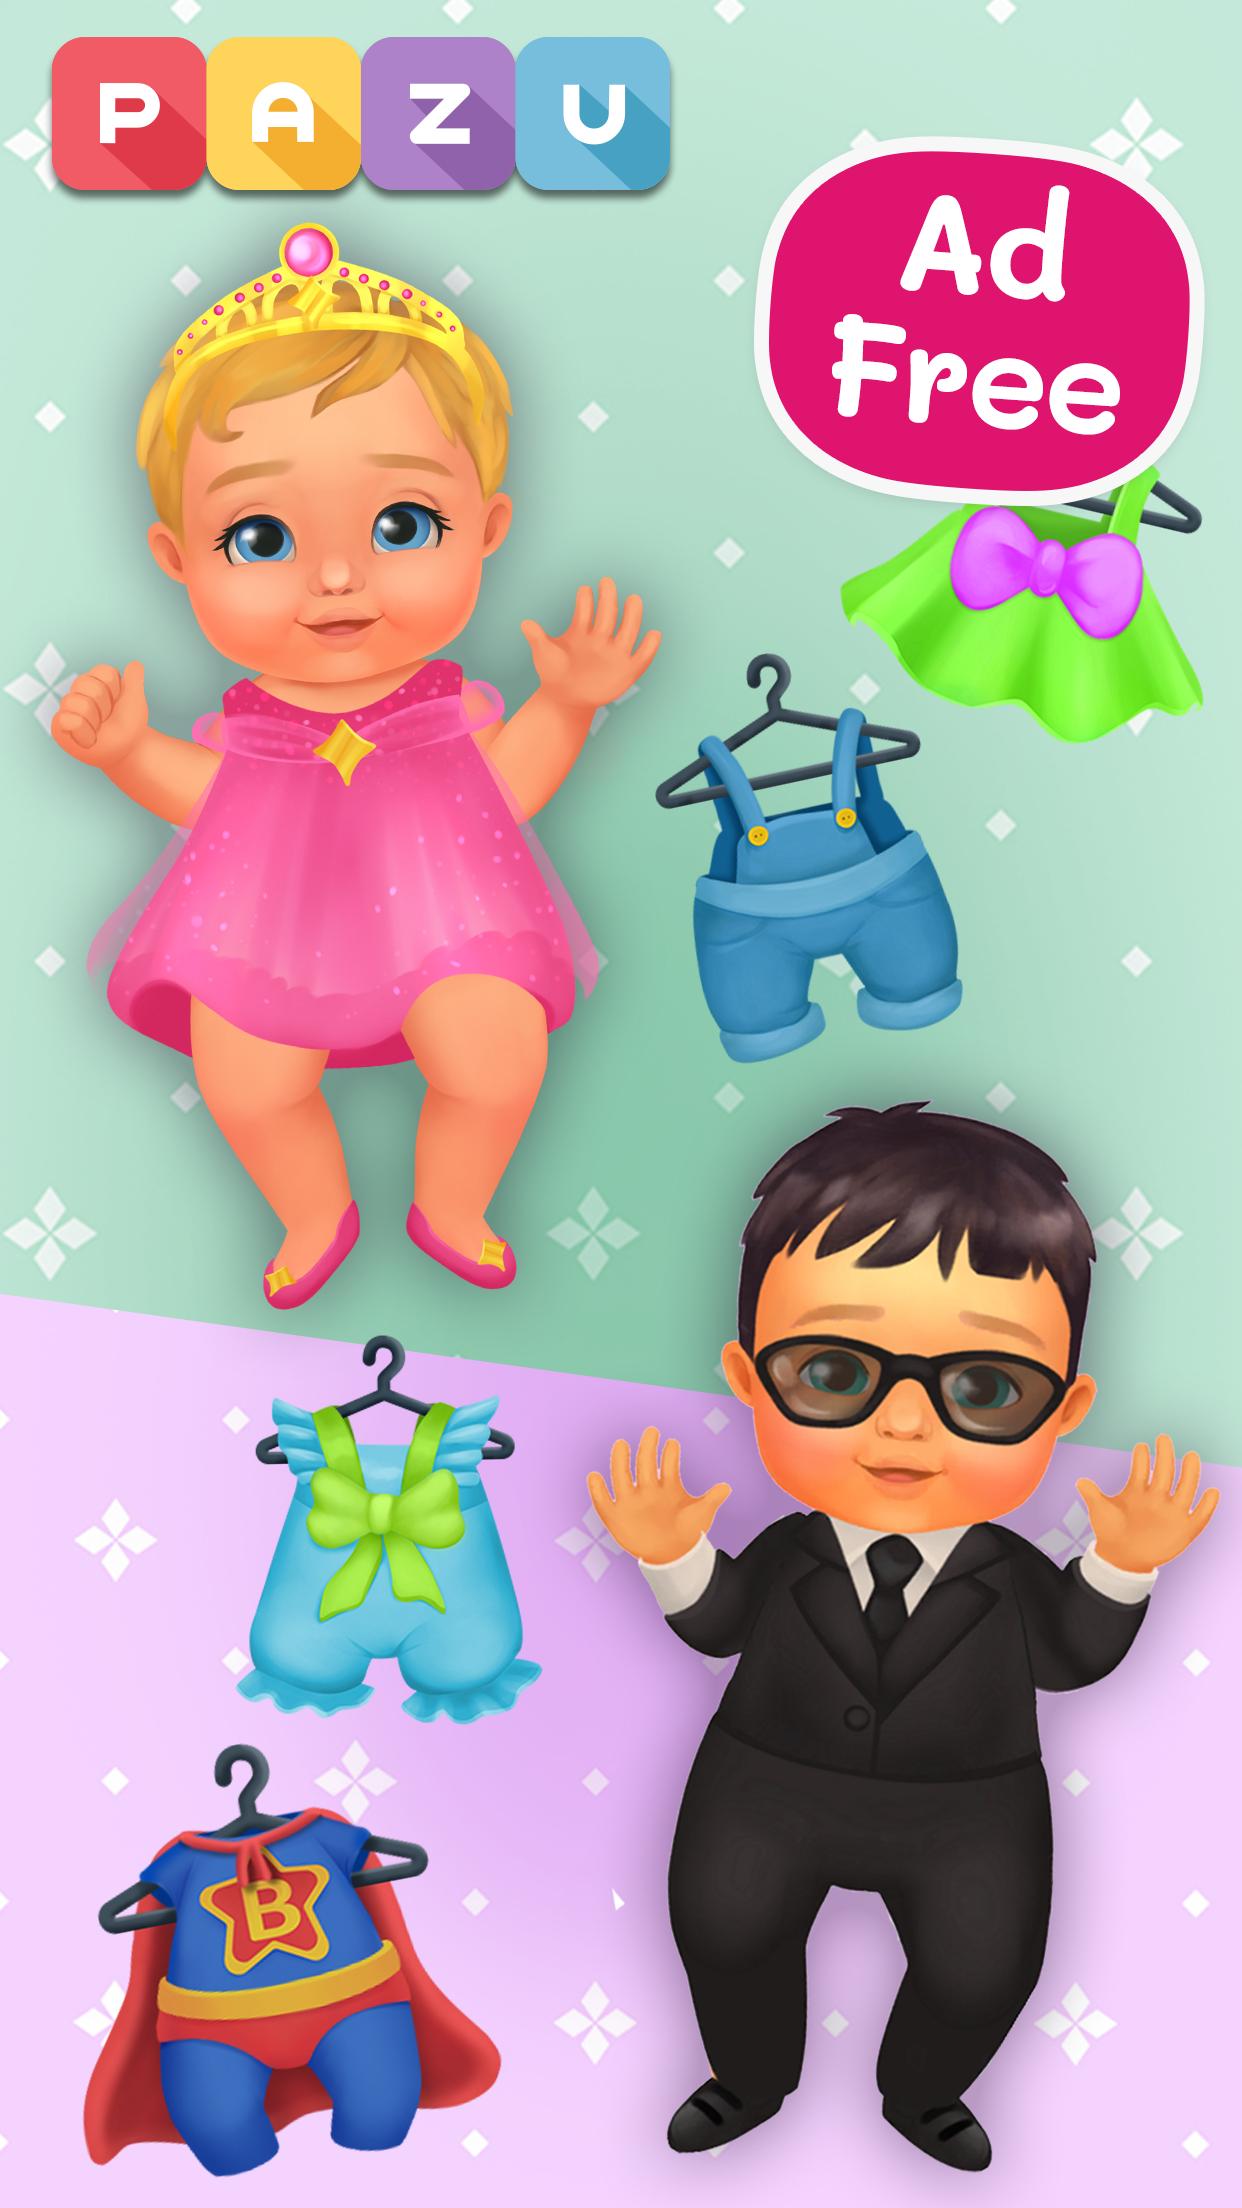 Chic Baby 2 Dress up & baby care games for kids 1.02 Screenshot 3